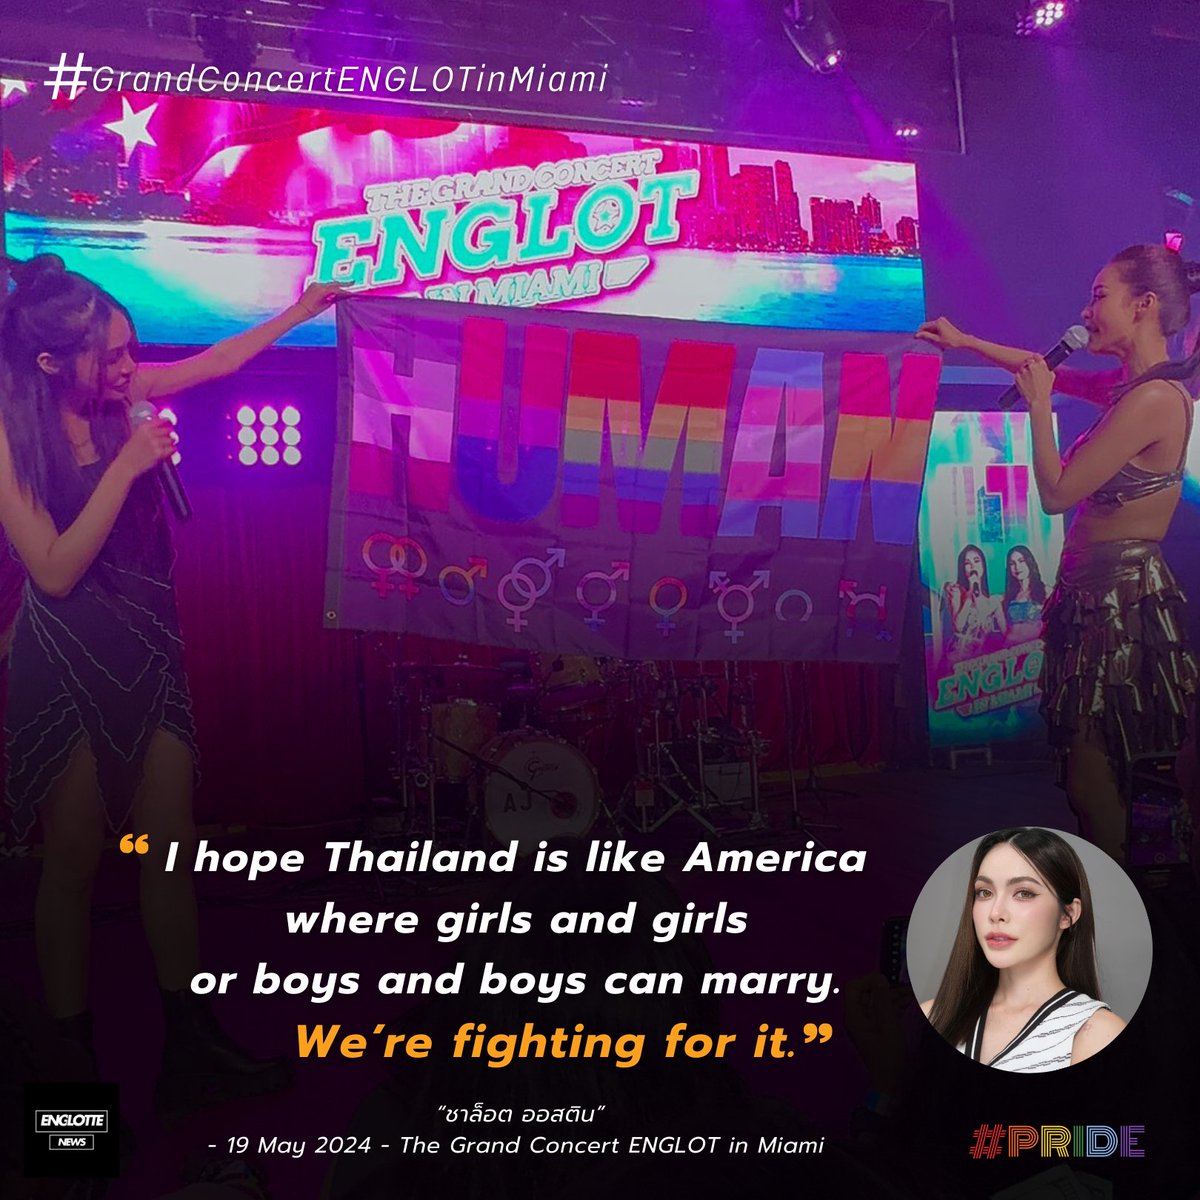 “I hope Thailand is like America where girls and girls or boys and boys can marry. We’re fighting for it.” 🏳️‍🌈 - ชาล็อต ออสติน 

...
Cr. englotvibes
#GrandConcertENGLOTinMiami